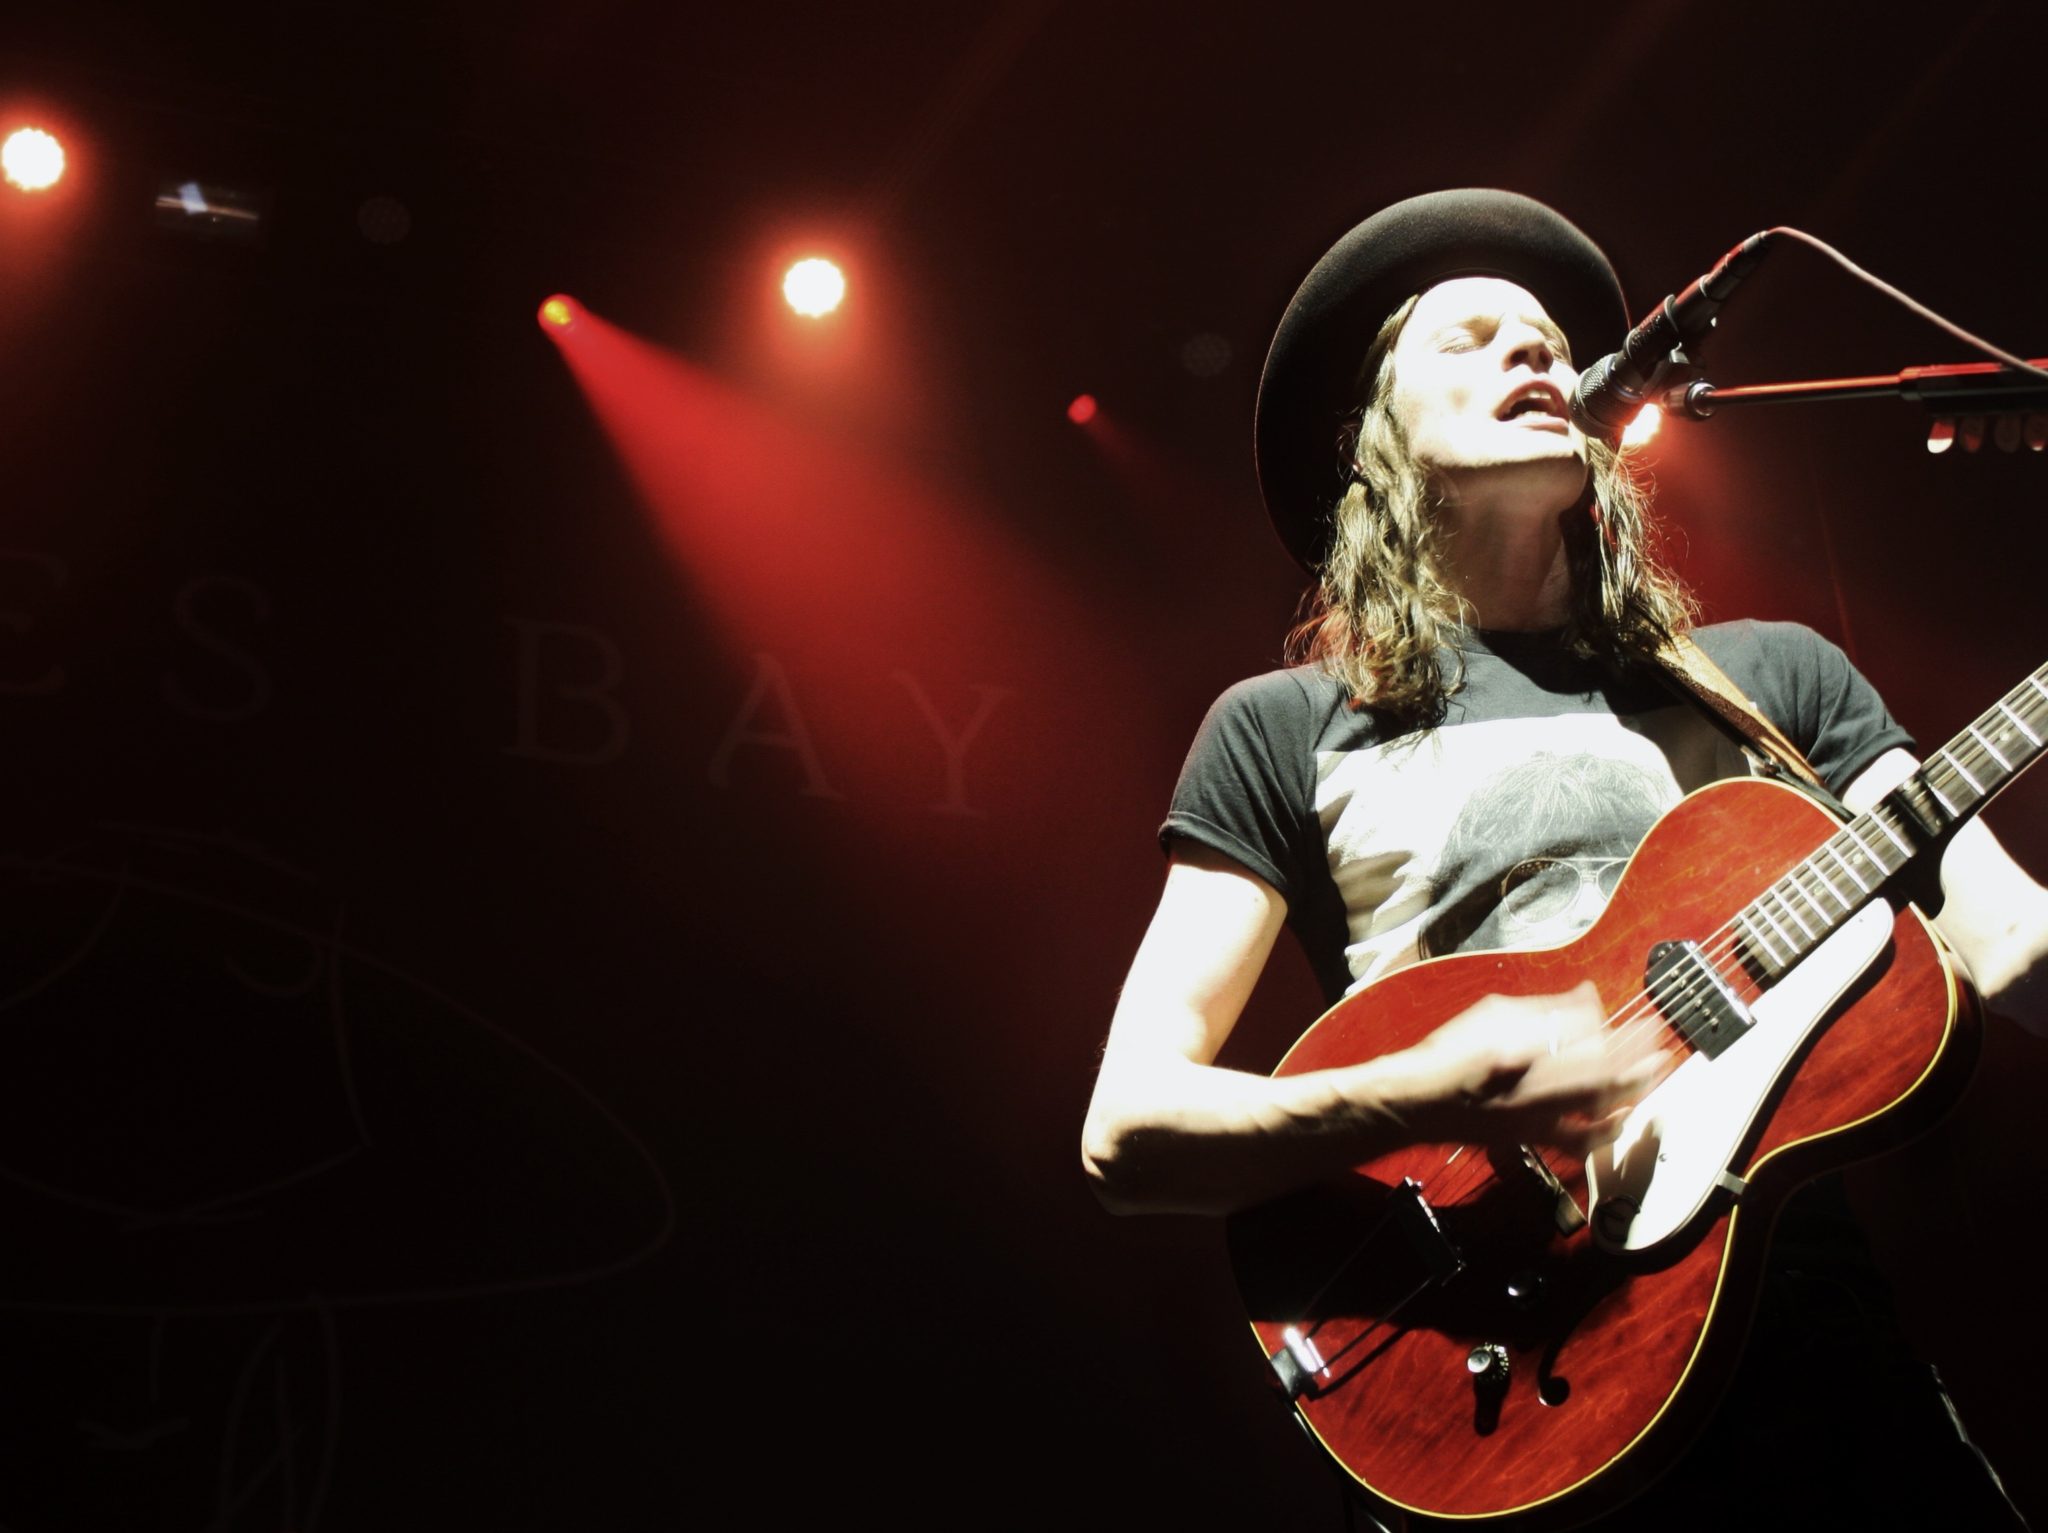 james bay, concert, music photography, new york concert, musician, emerging artist, chaos and the calm, british music, music, guitar, singer, songwriter, republic records, indie pop, indie folk, guitarist,